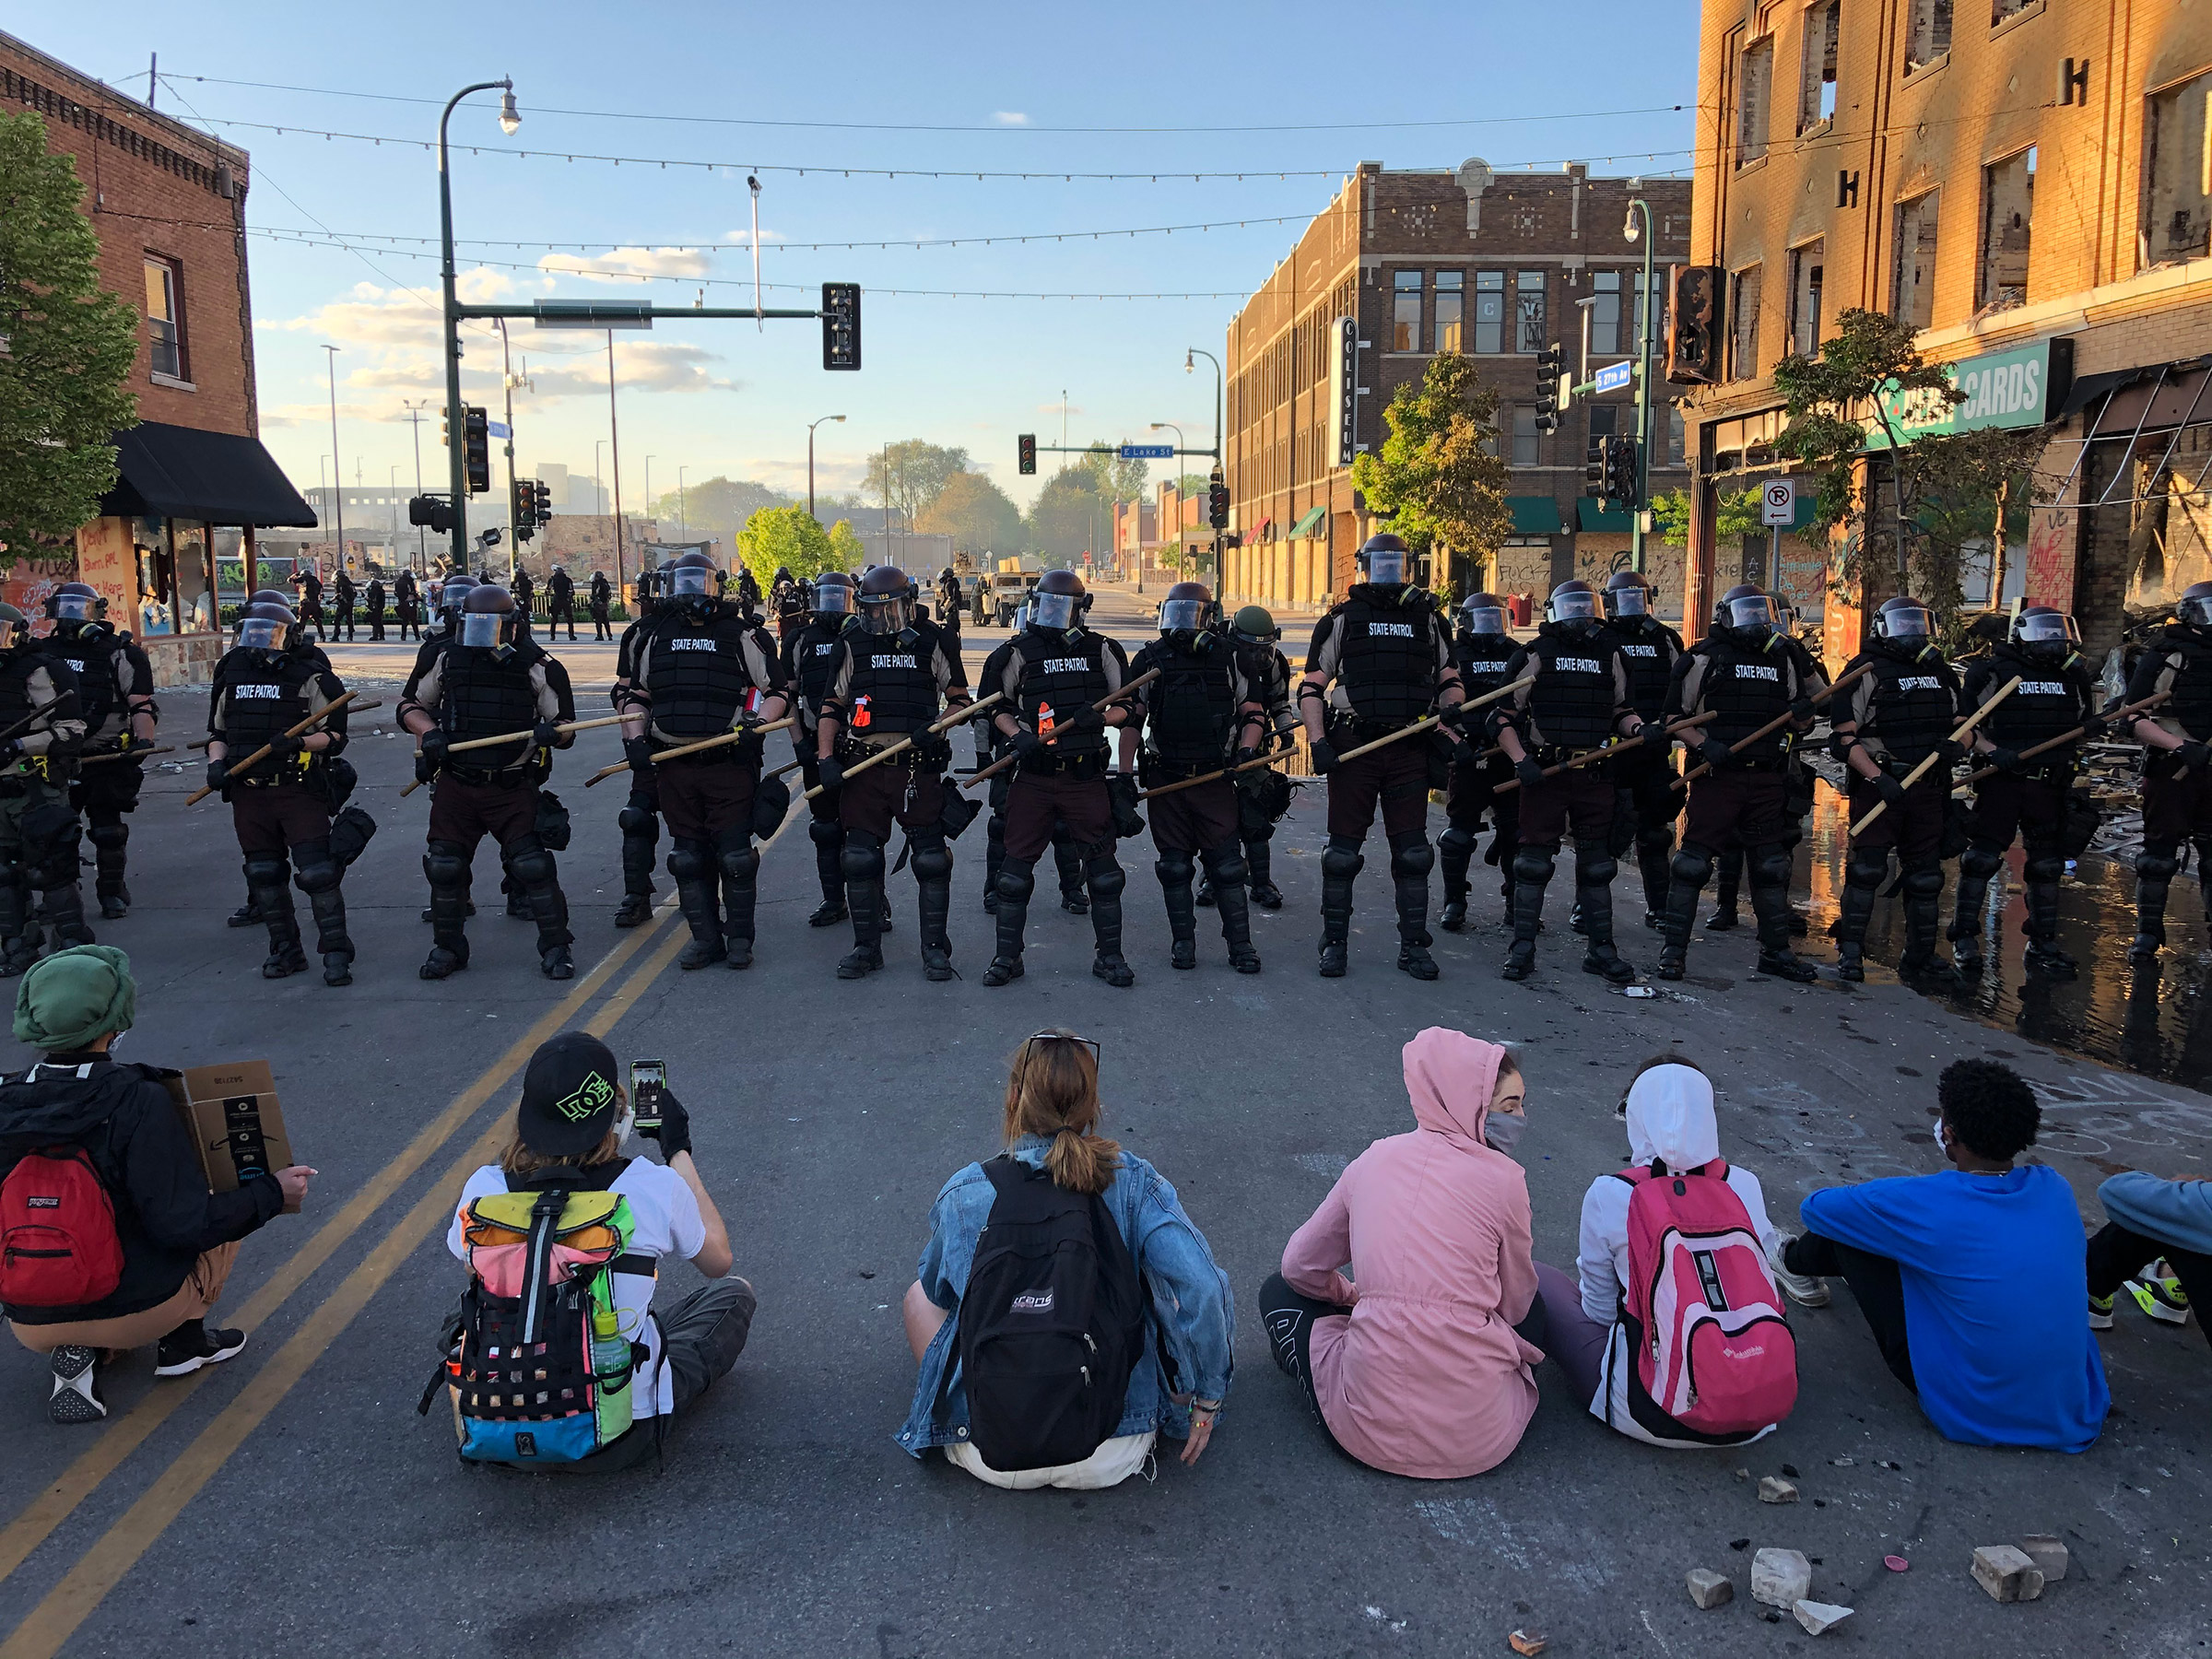 People sit on the street in front of a row of police officers during a rally in Minneapolis on May 29 after the death of George Floyd. (Kerem Yucel—AFP/Getty Images)